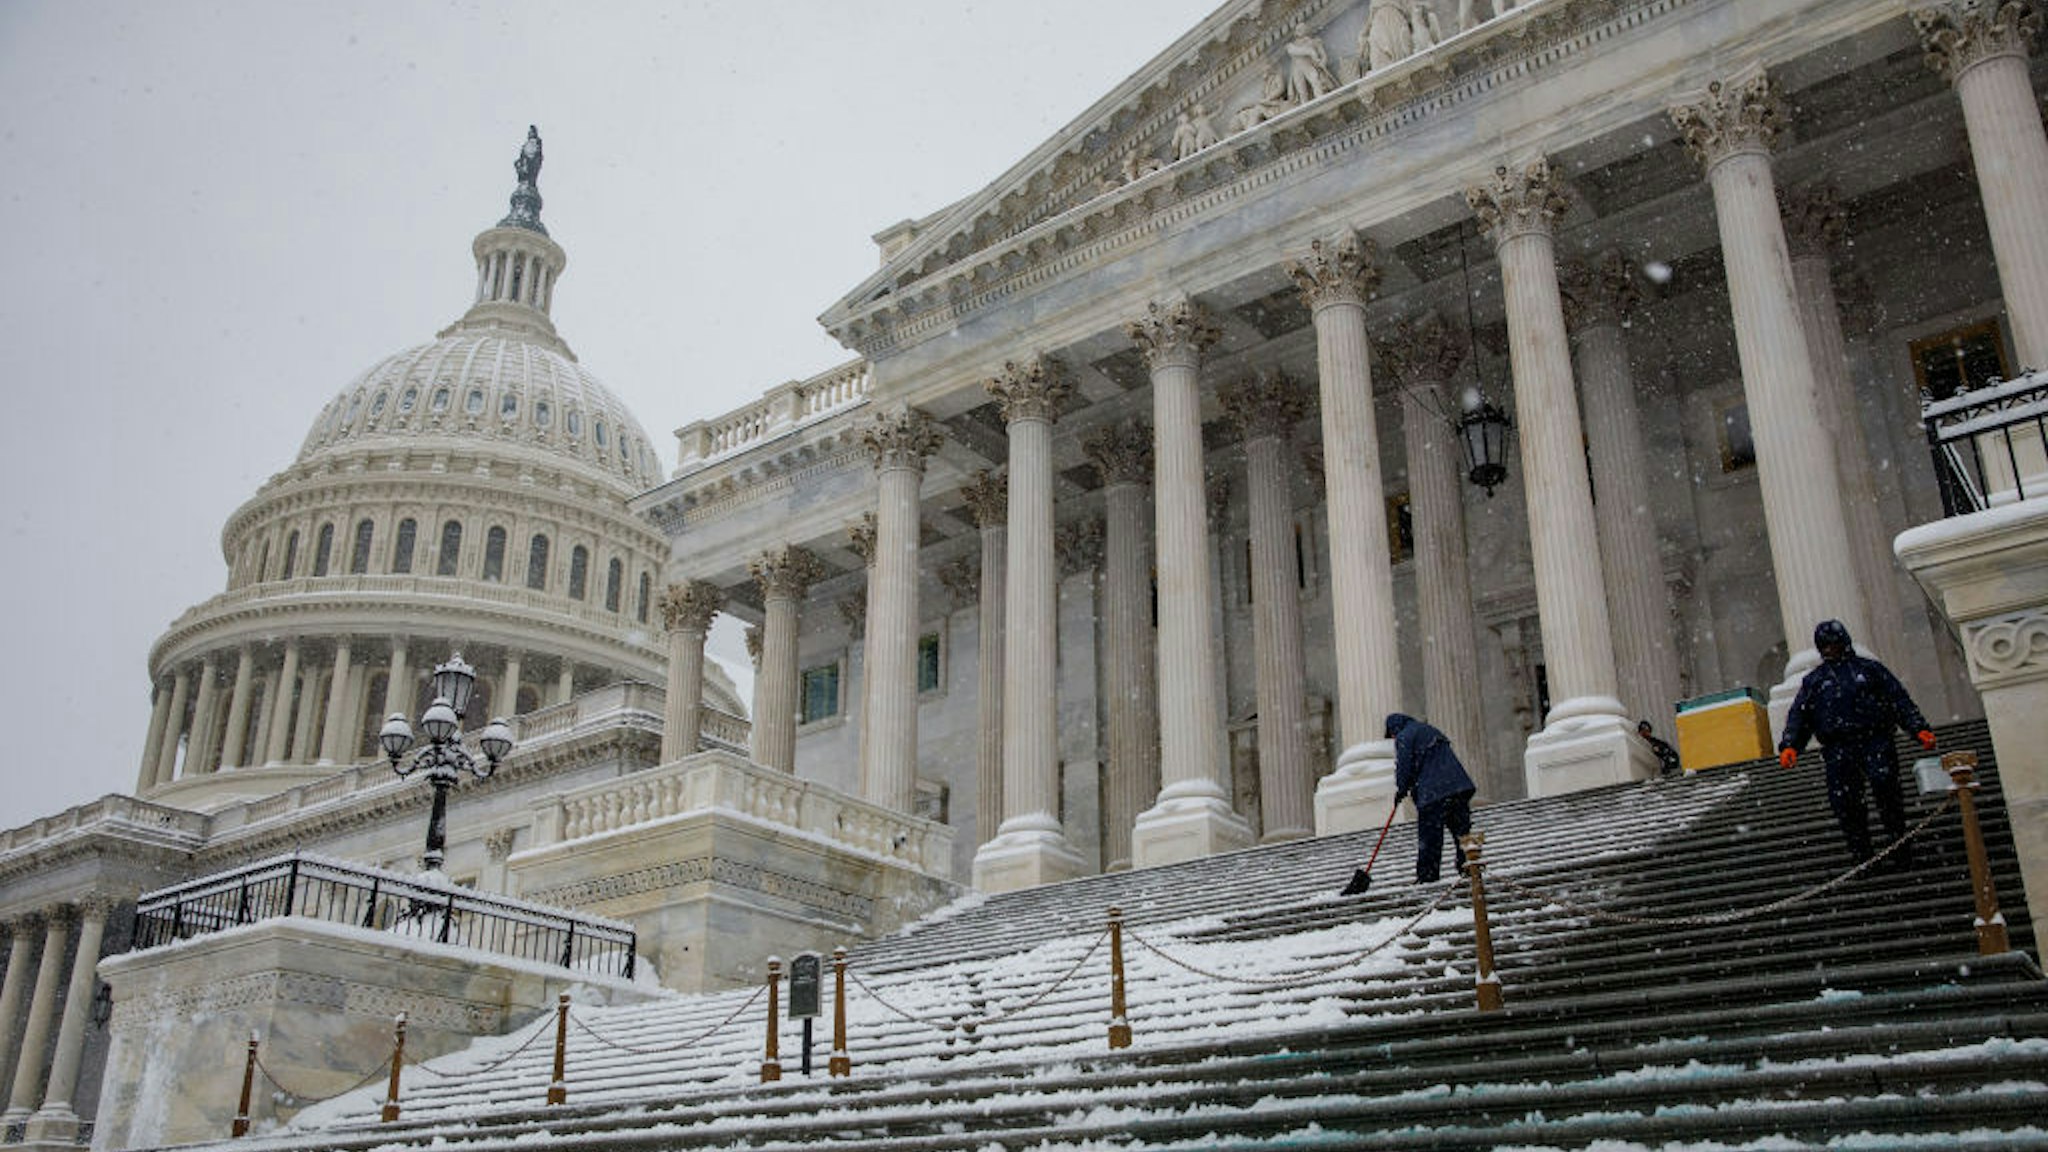 The Capitol Hill is seen in snow in Washington D.C., the United States, on Jan. 13, 2019. (Xinhua/Shen Ting)